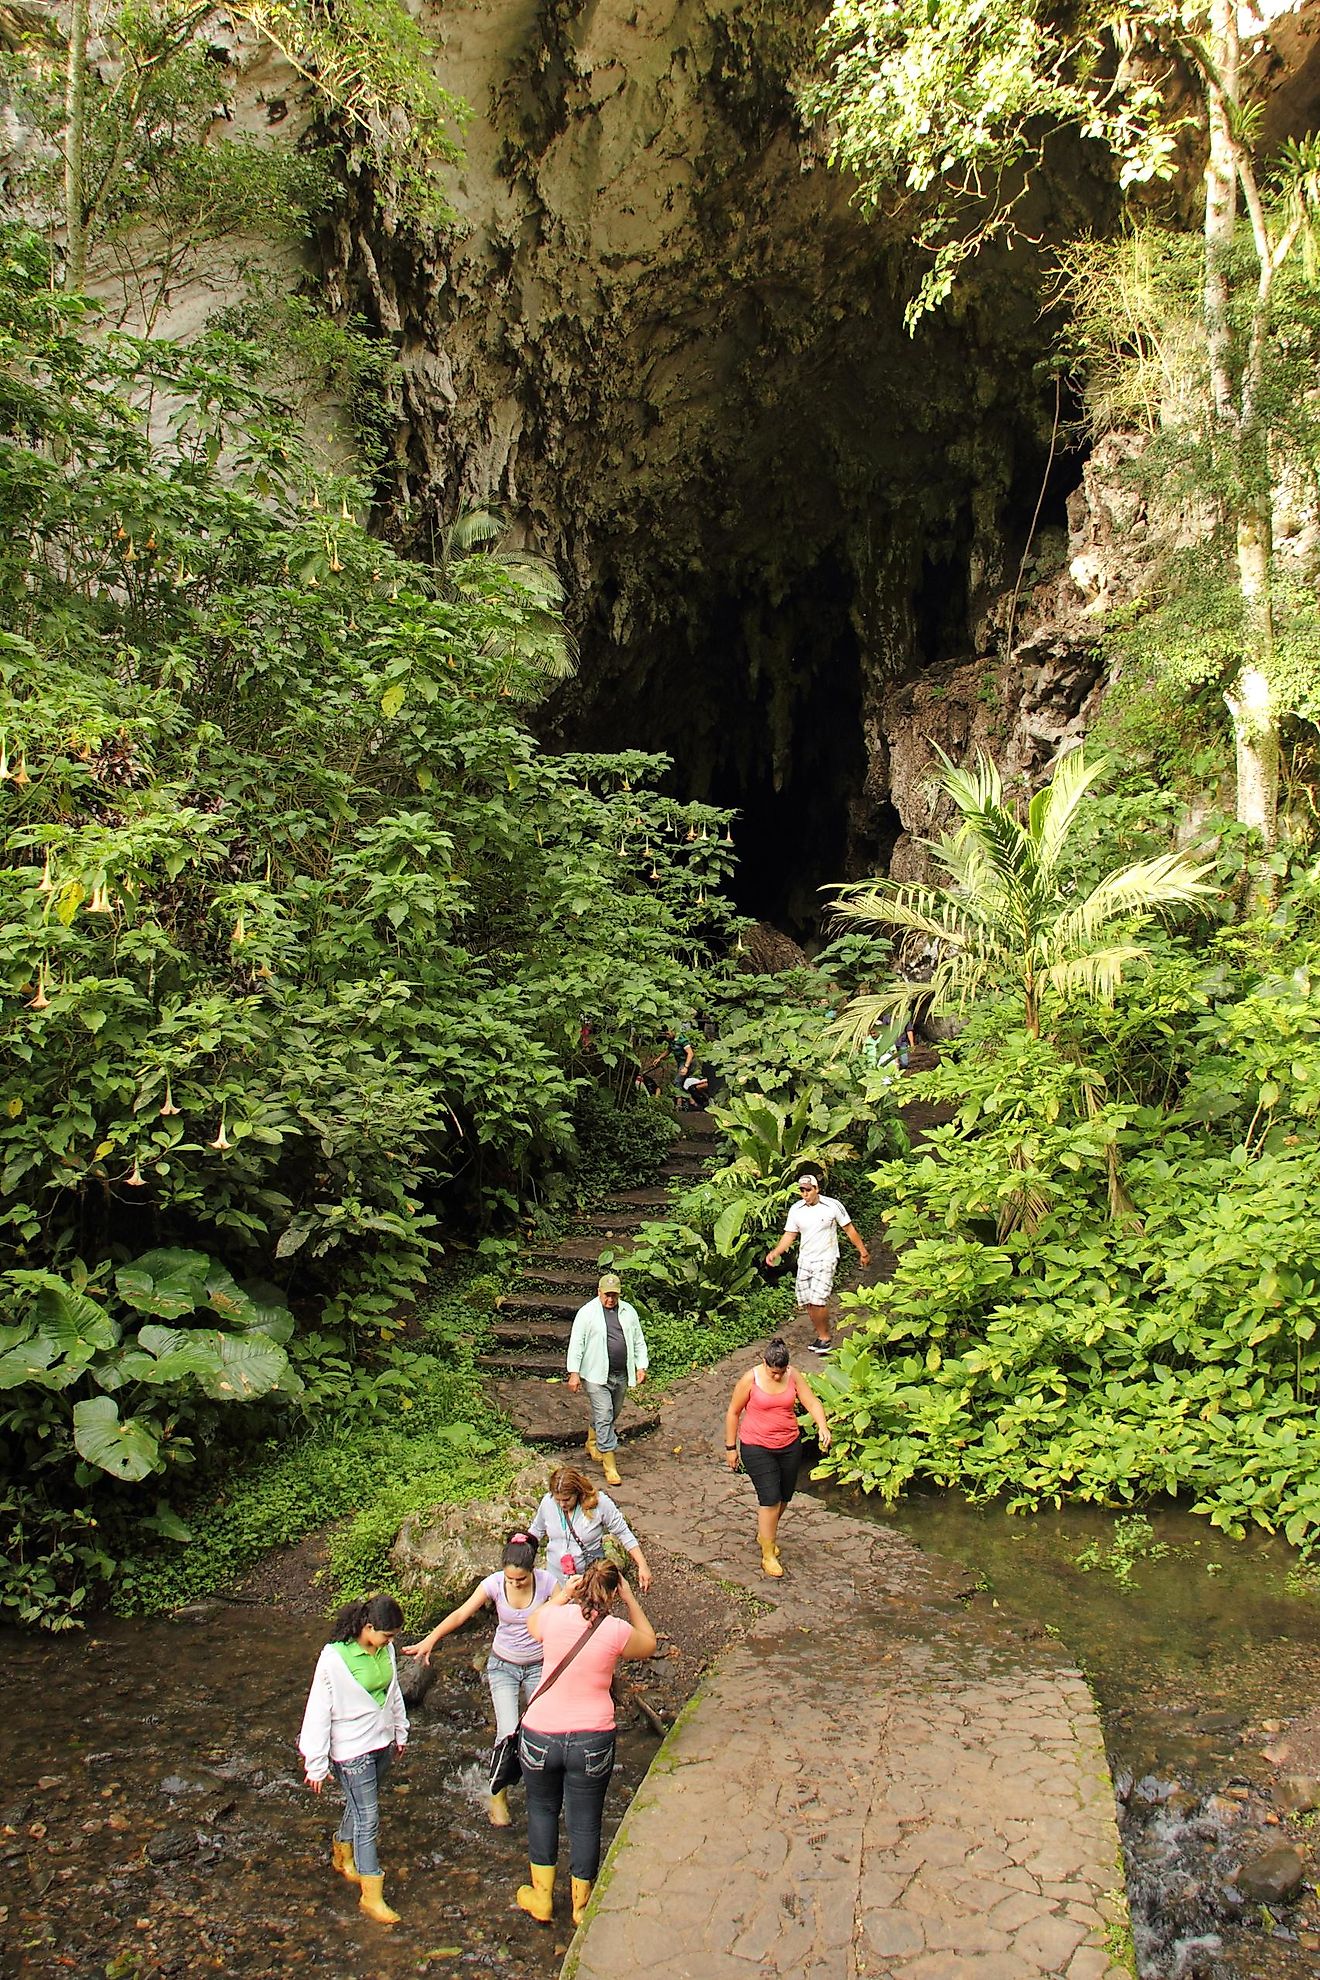 Entrance to Guacharo Cave and National Park located in Caripe, Monagas. Image credit: Edgloris Marys/Shutterstock.com